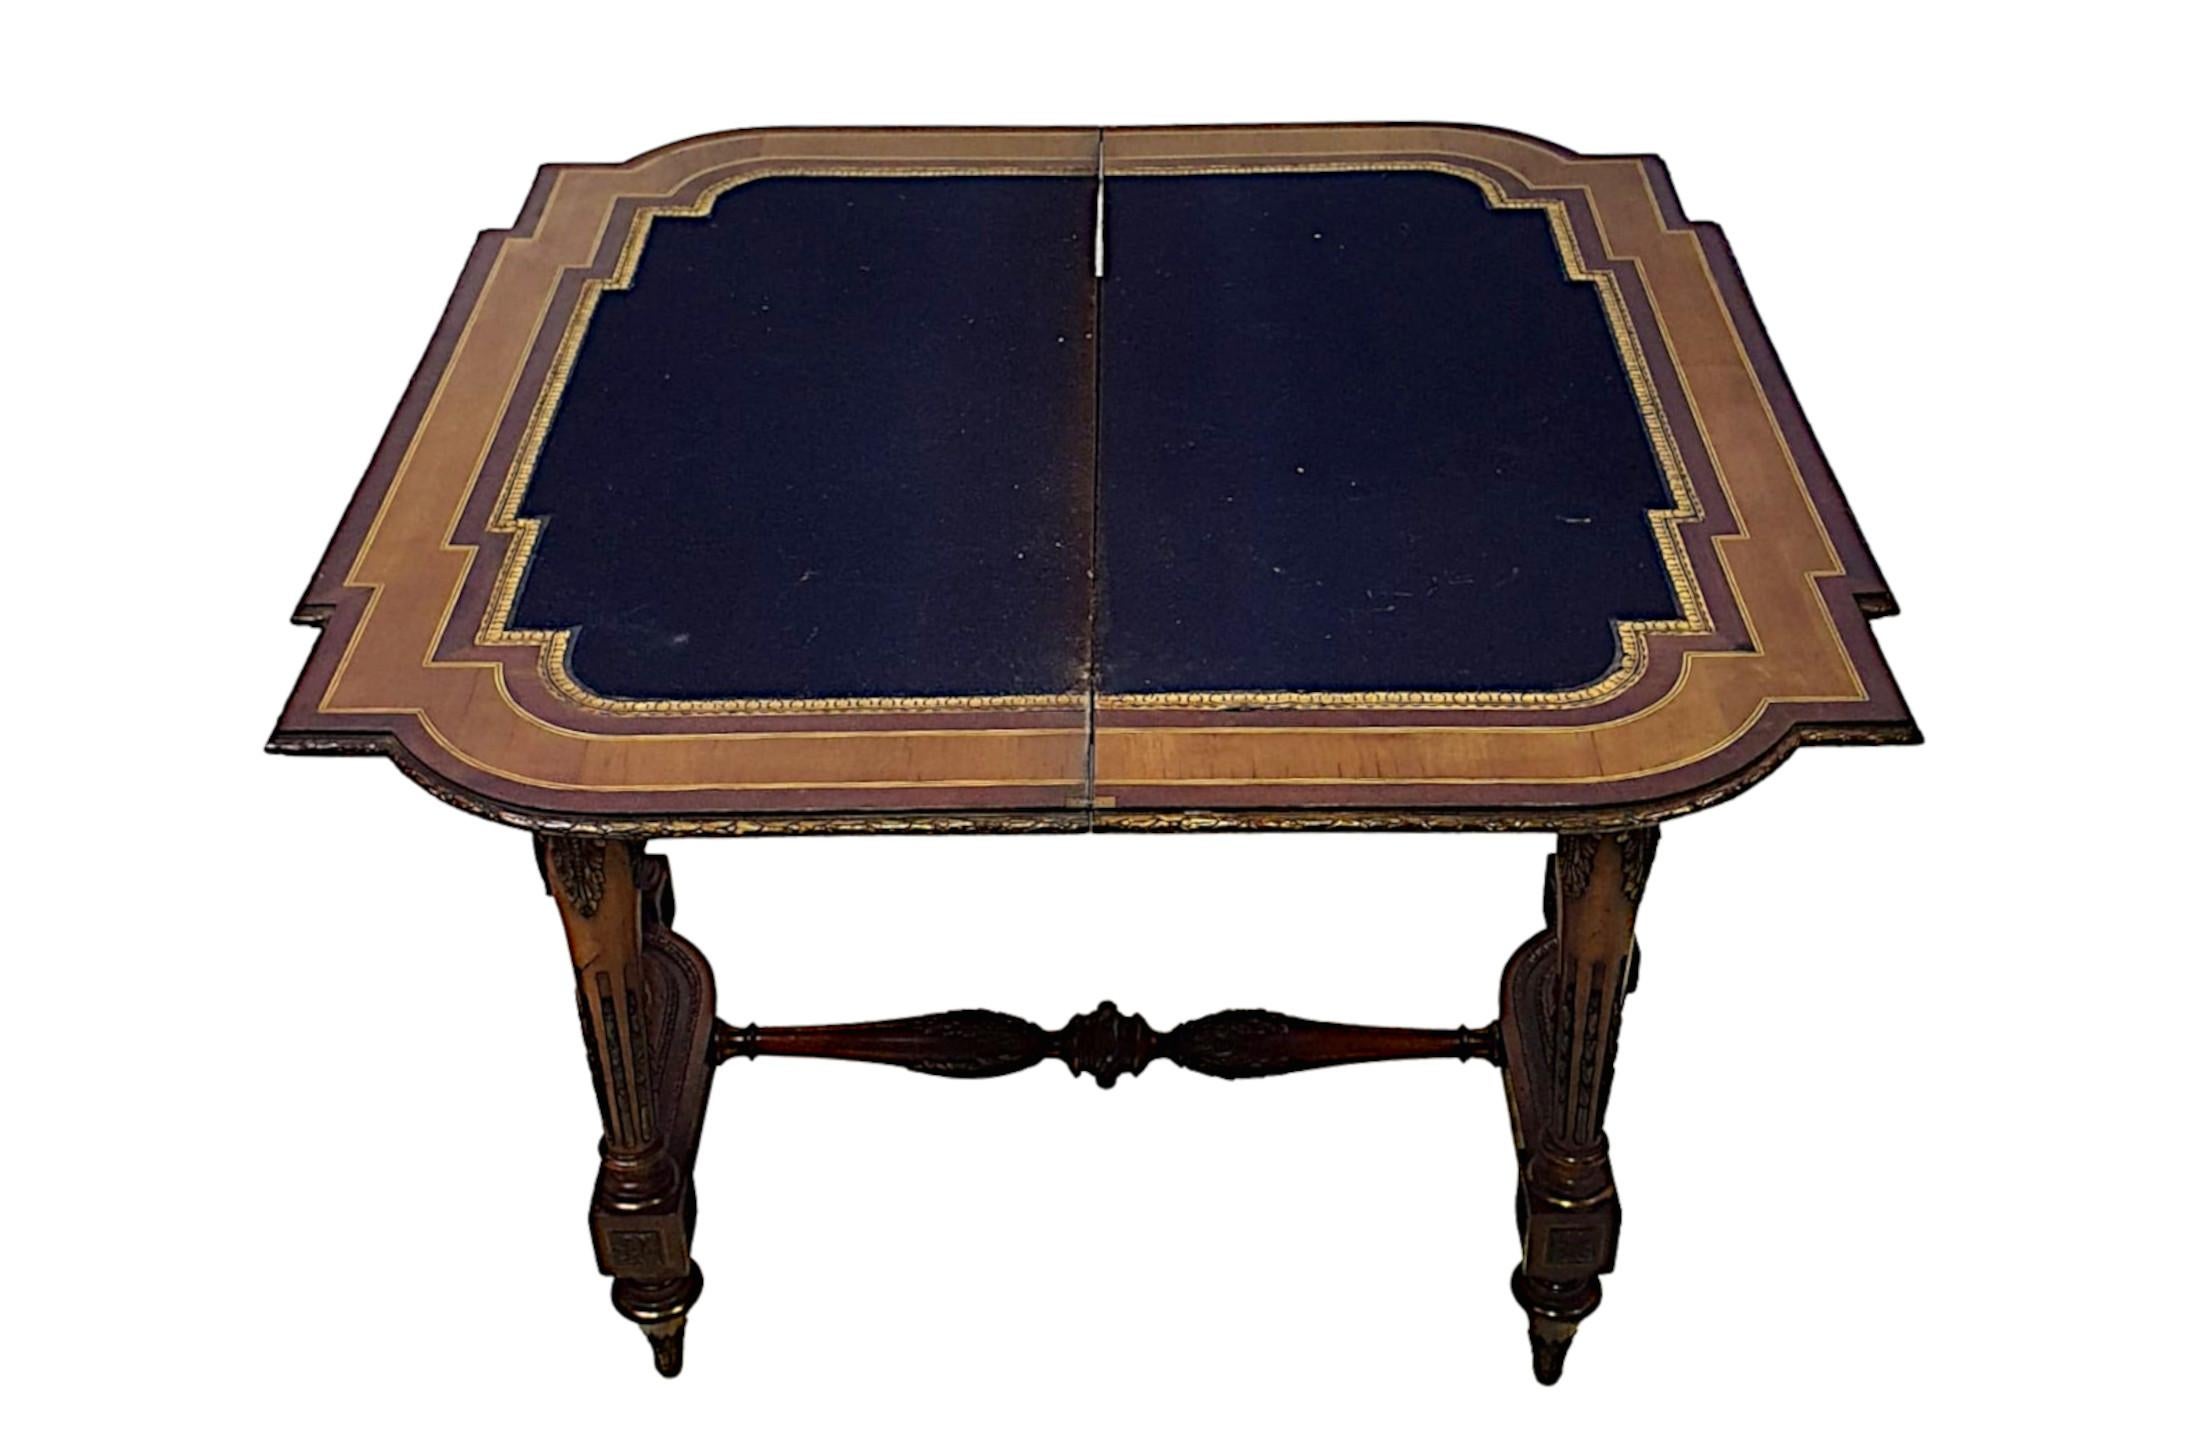 Baize Very Fine and Rare 19th Century Museum Quality Marquetry Inlaid Card Table For Sale